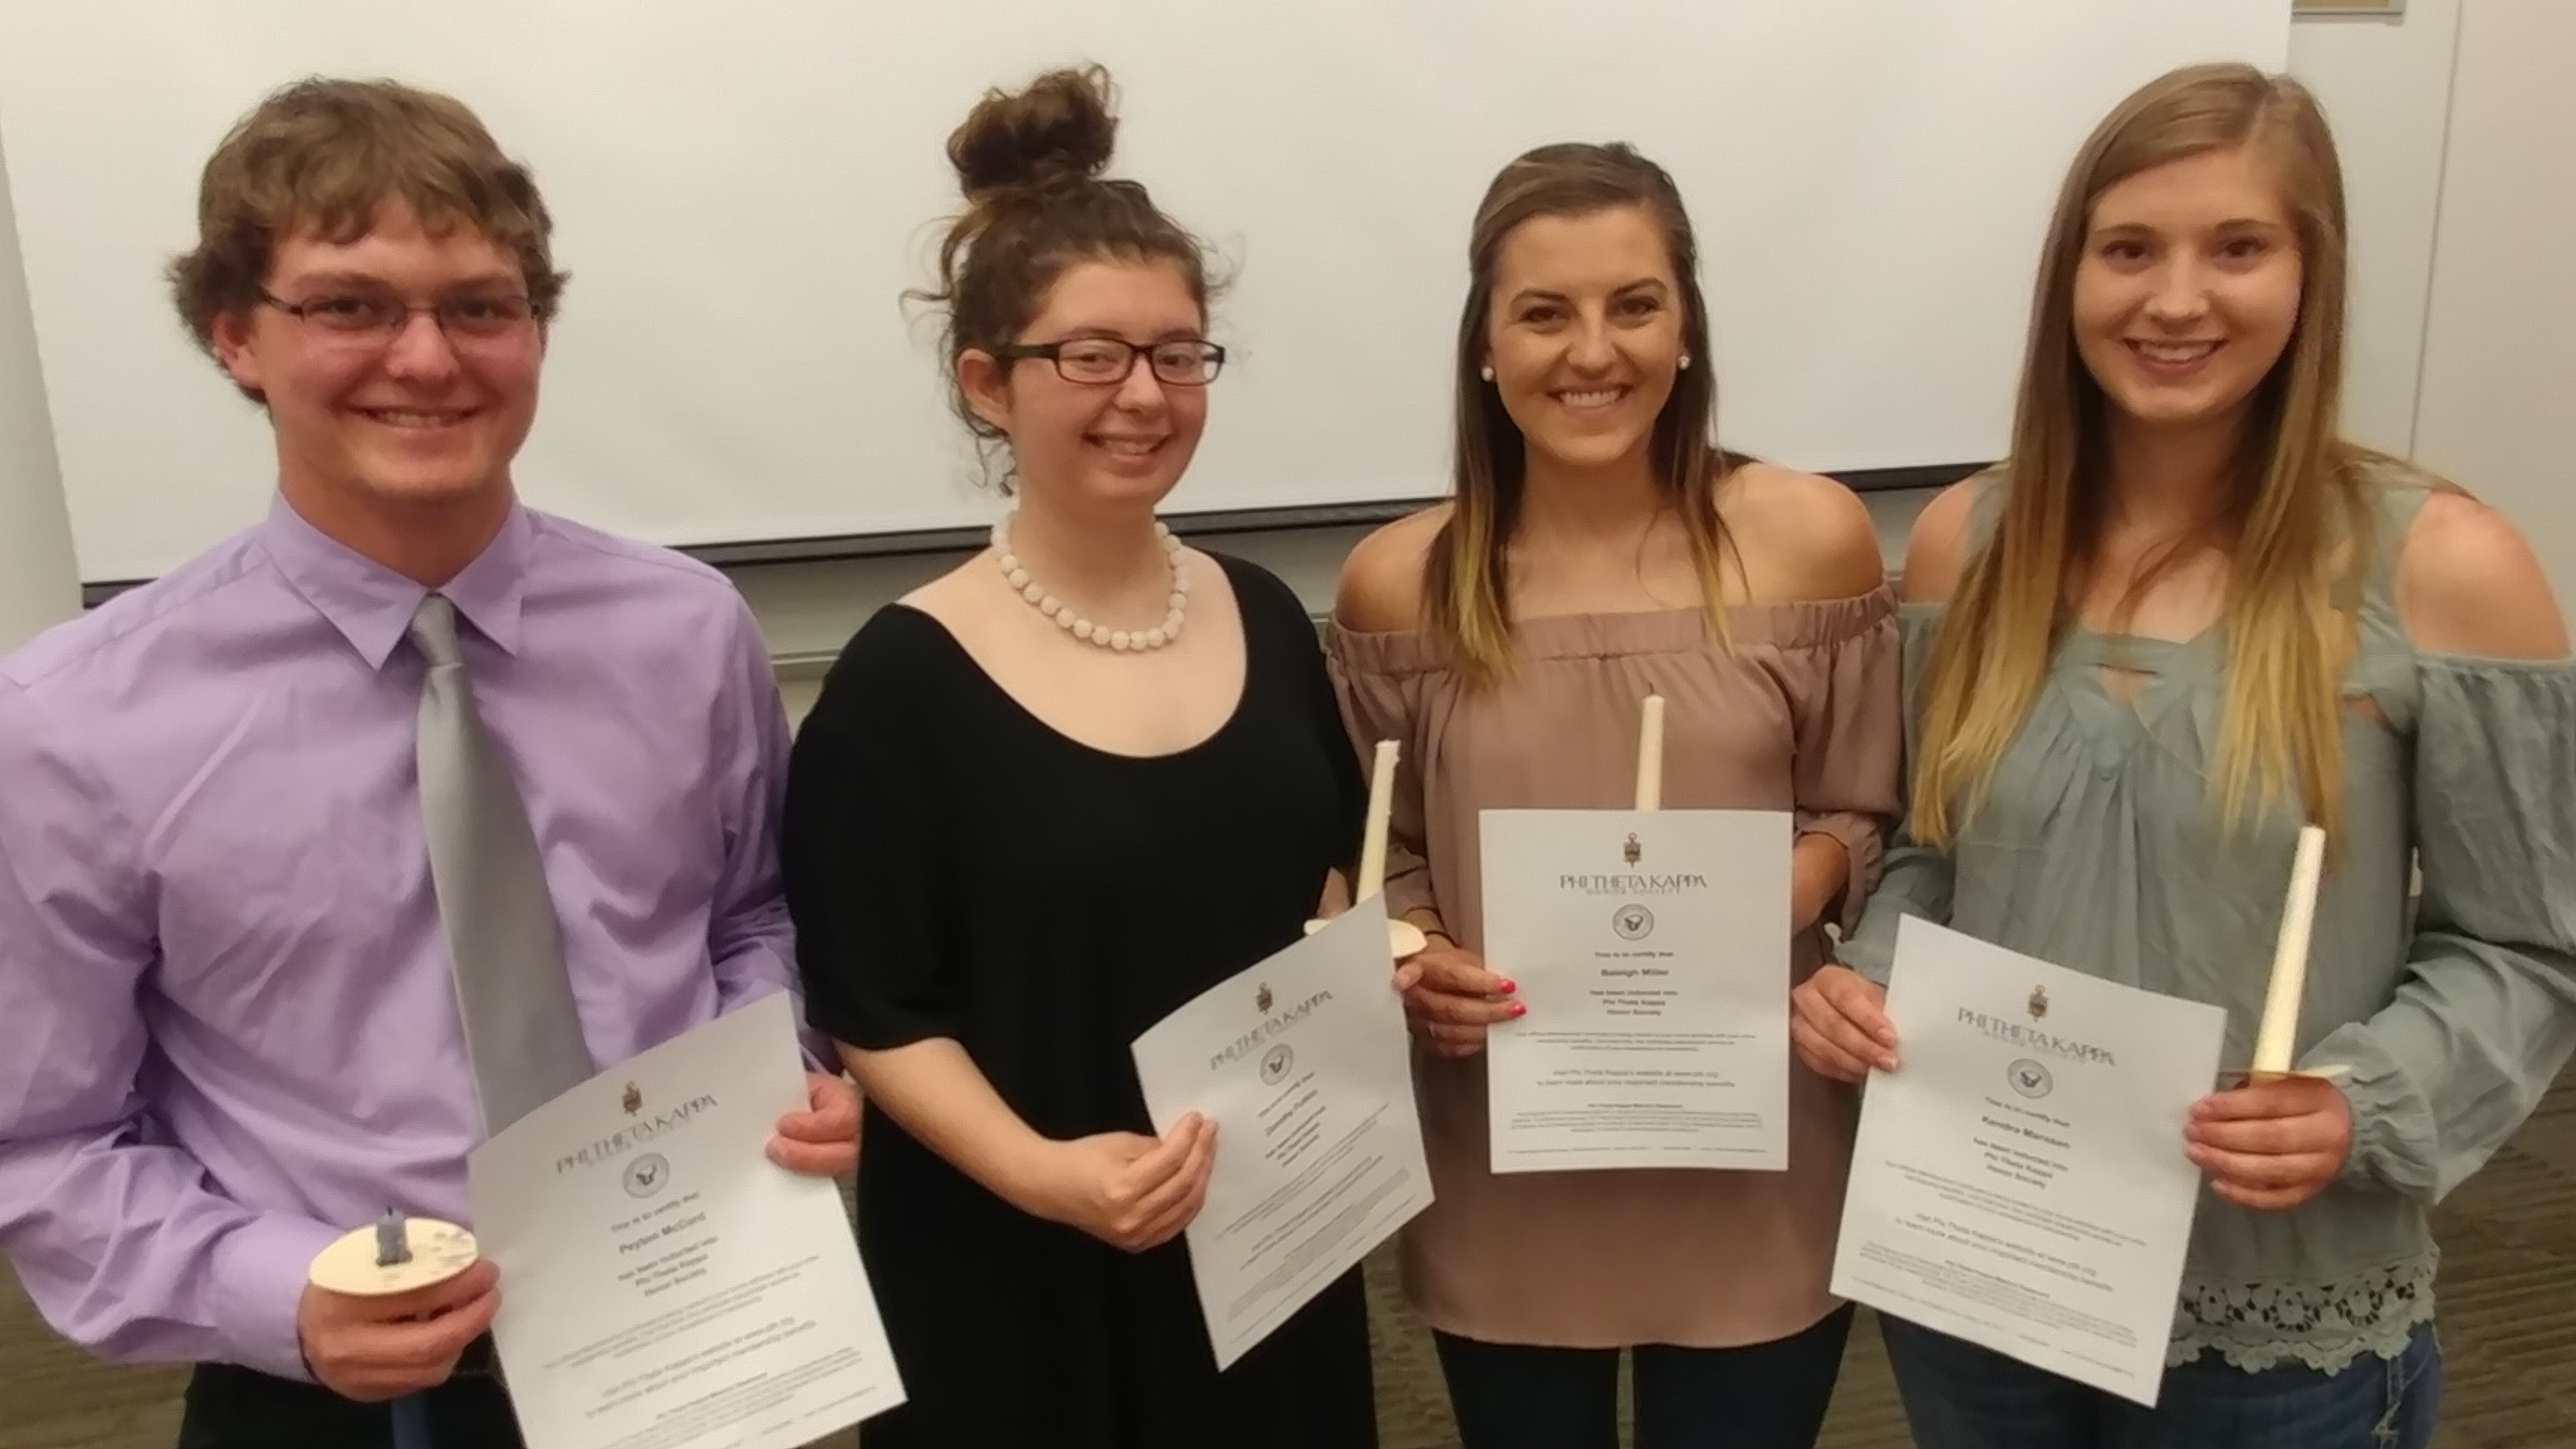 Phi Theta Kappa academic honorary features Dean's List and Honor Roll students. The 2018-19 PTK officers, from left, are Peyton McCord, vice president; Dorothy Fulton, president; Baleigh Miller, student senate, and Kendra Marxsen, historian. Not pictured are Leighlynn Obermiller, secretary, and Shayla Woracek, student senate. All six were named to the NCTA Dean’s List or Honor Roll this spring. (Mary Crawford/NCTA Photo) 